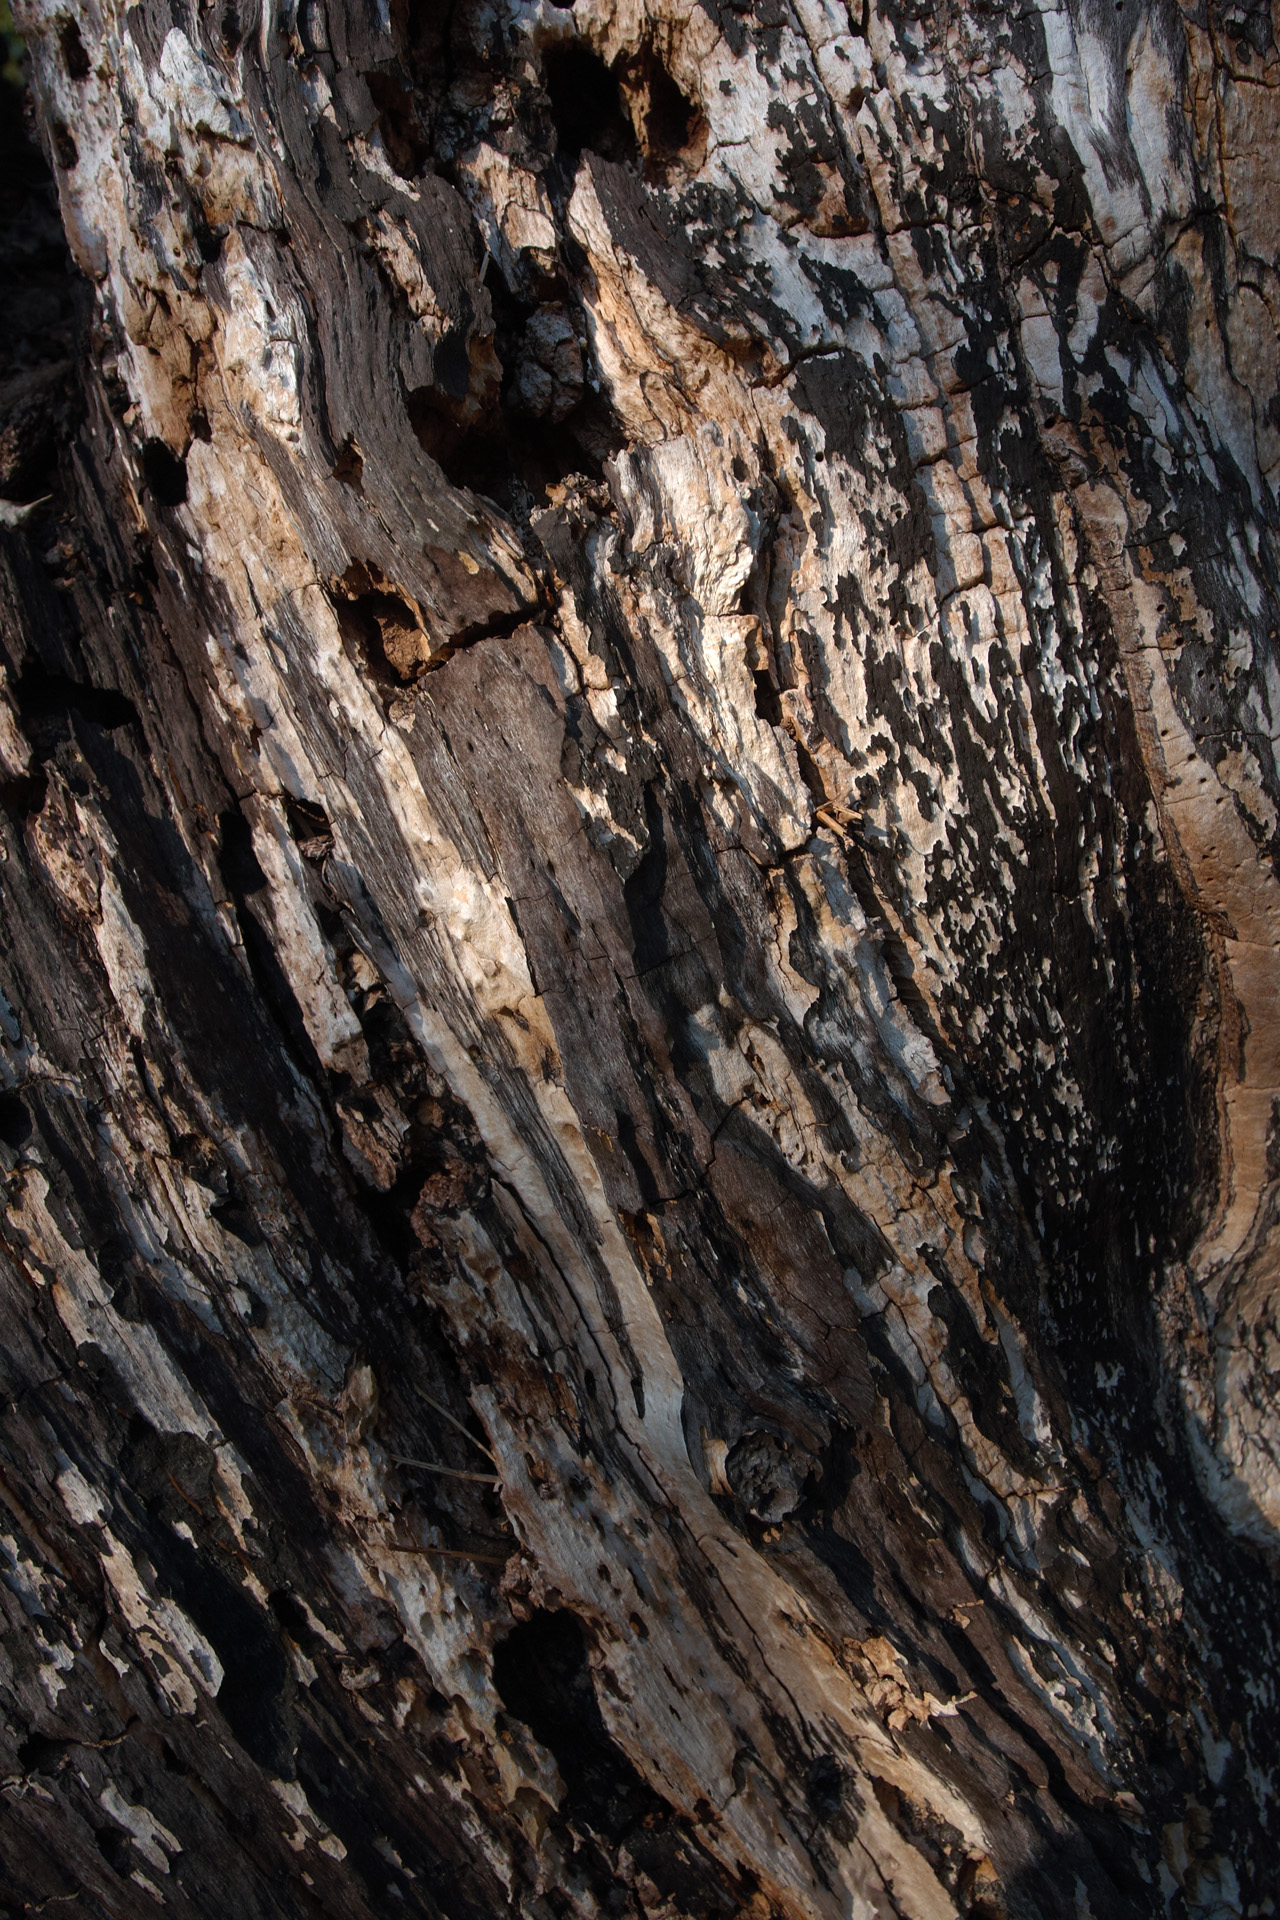 Heavily Weathered and Textured Bark